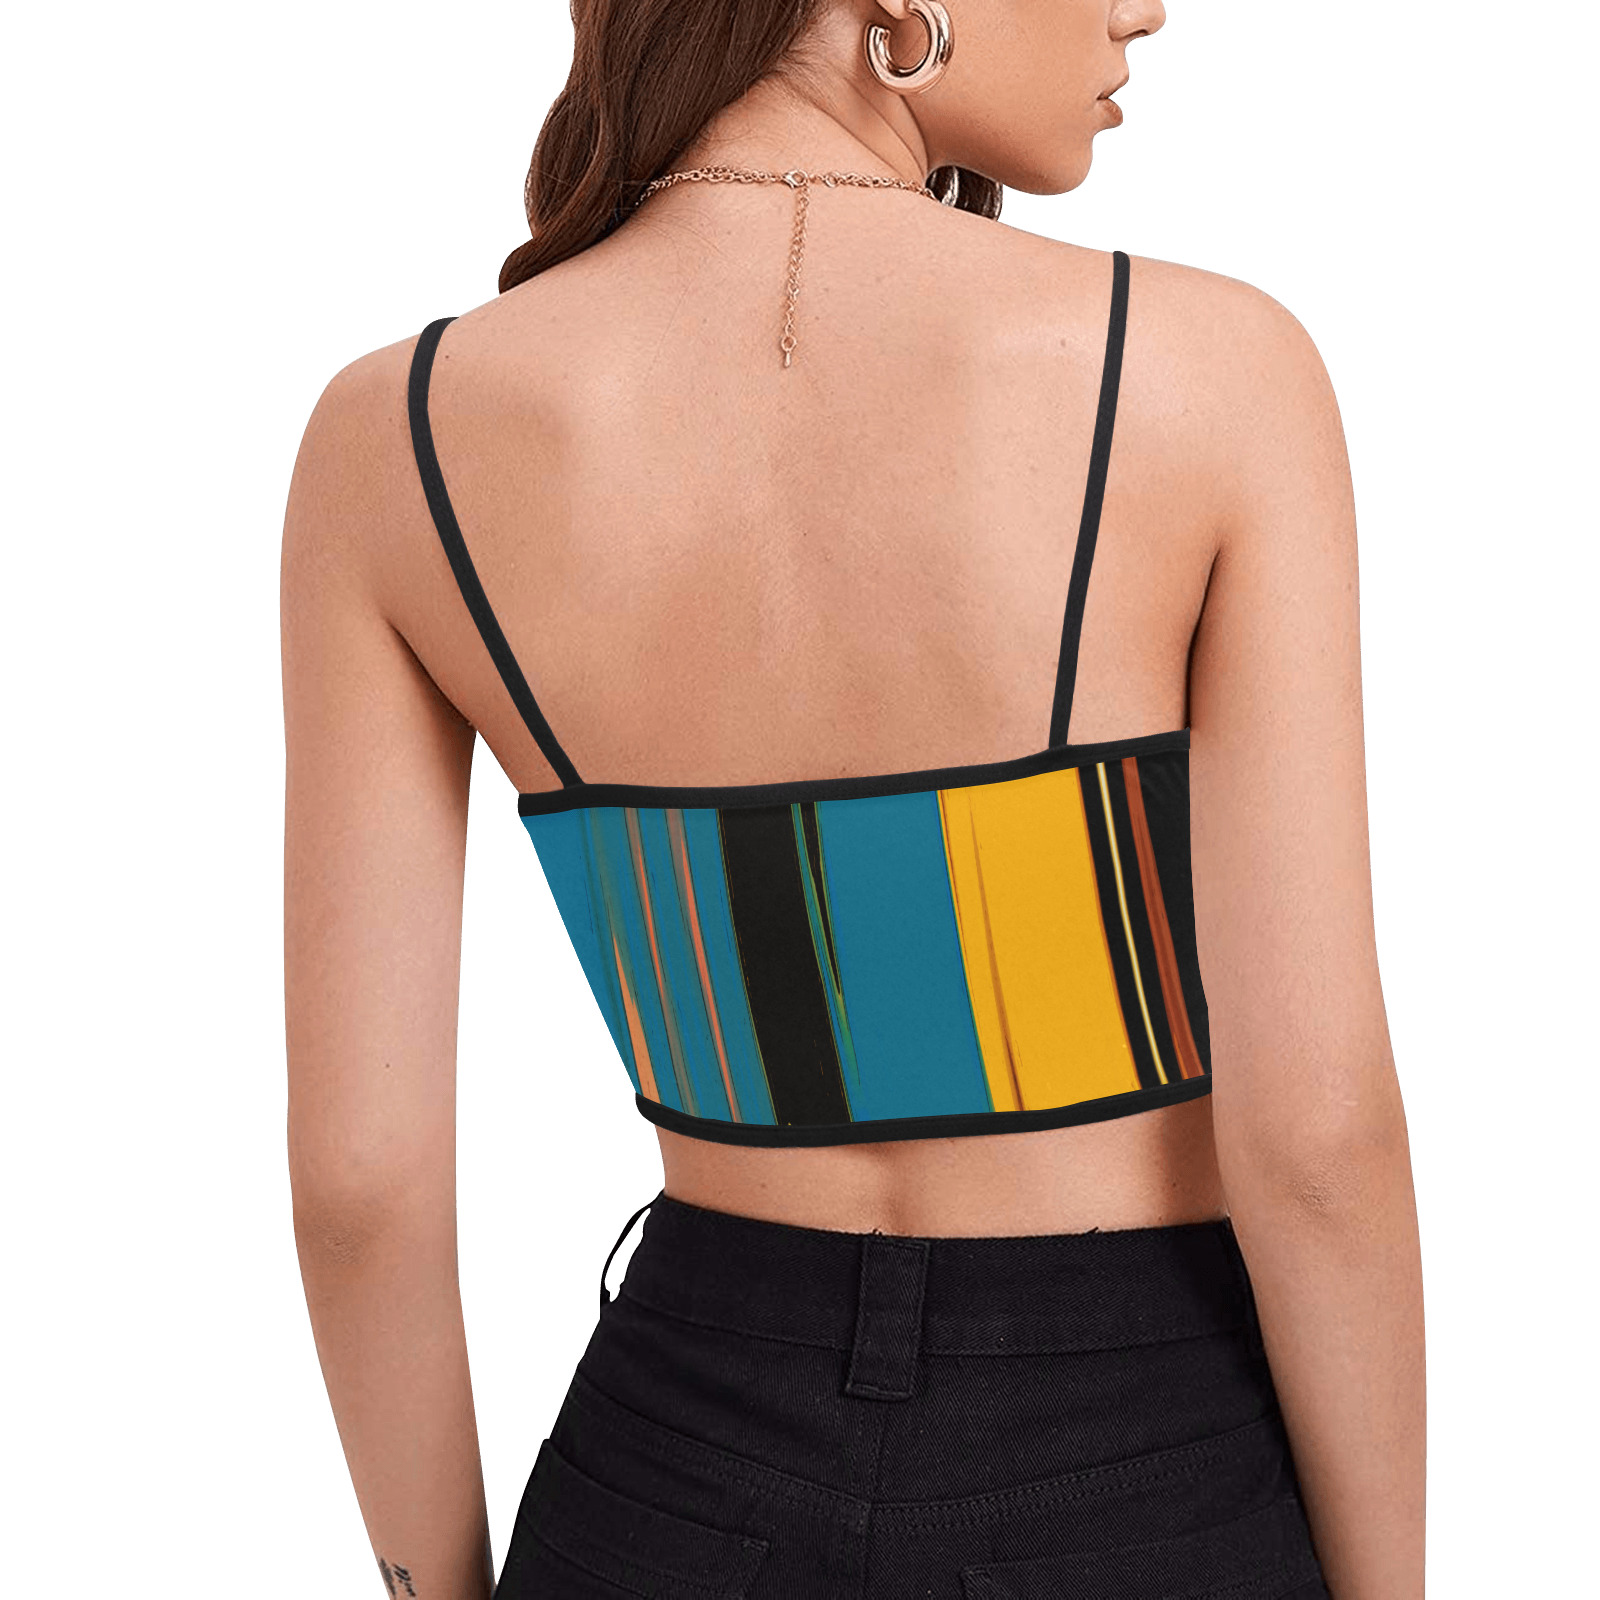 Black Turquoise And Orange Go! Abstract Art Women's Spaghetti Strap Crop Top (Model T67)